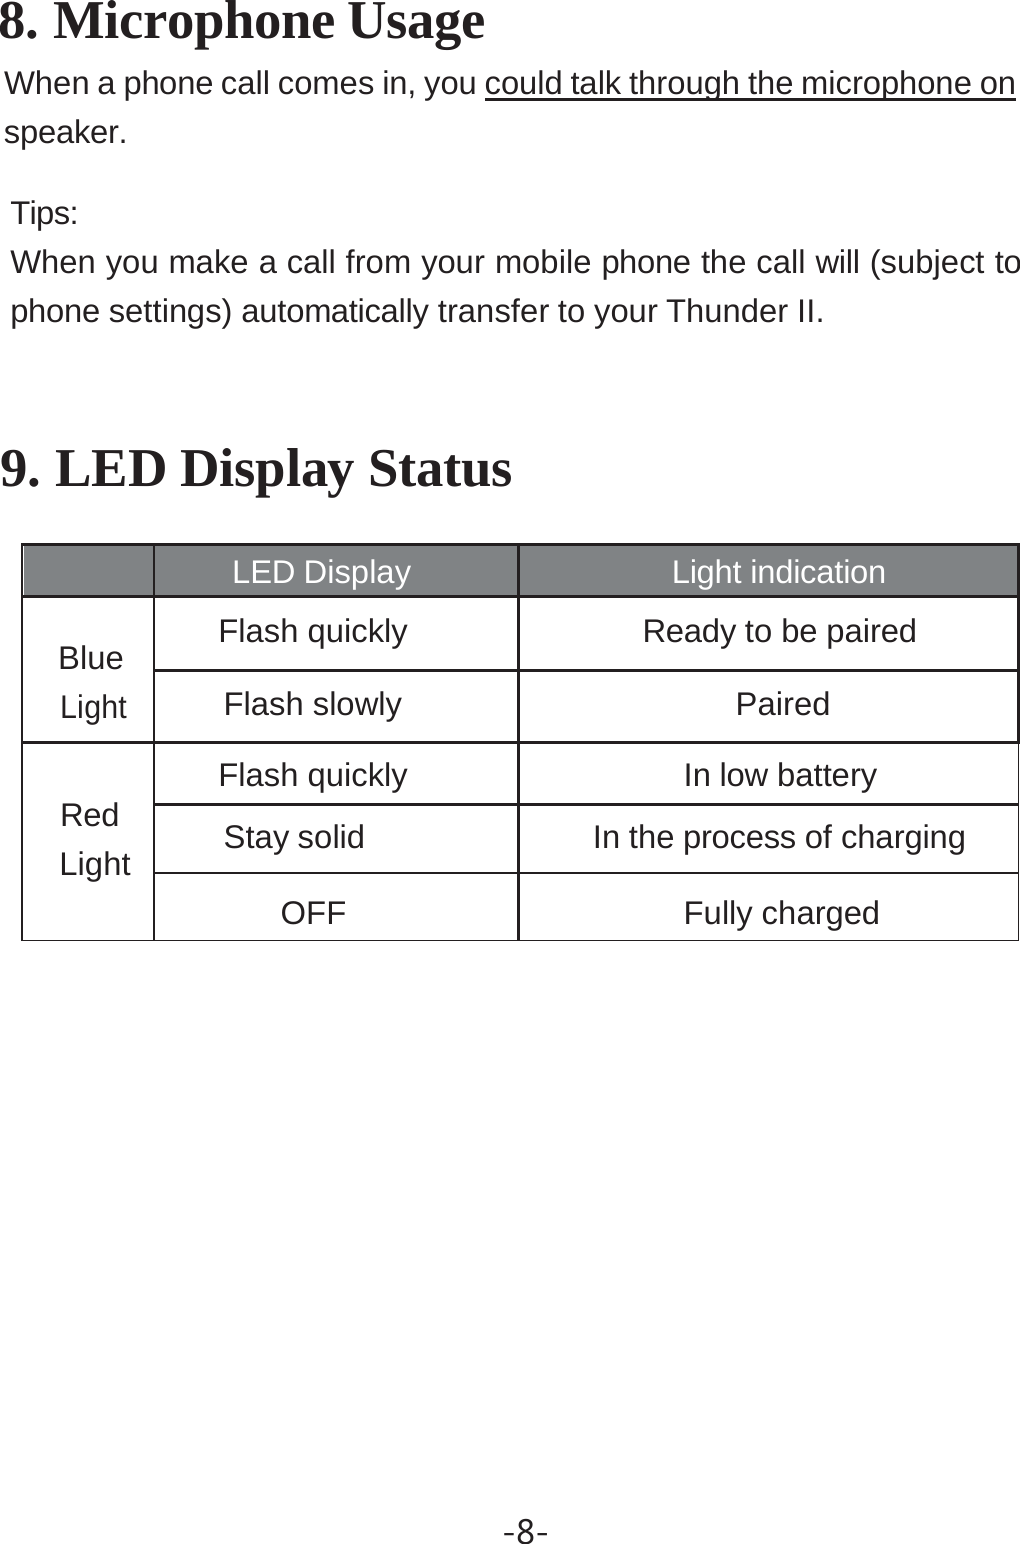 When a phone call comes in, you could talk through the microphone on-8- 8. Microphone Usage  speaker.  Tips: When you make a call from your mobile phone the call will (subject to phone settings) automatically transfer to your Thunder II.  9. LED Display Status      LED Display Light indication  Blue Light Flash quickly Ready to be paired Flash slowly Paired   Red Light Flash quickly In low battery Stay solid In the process of chargingOFF Fully charged 